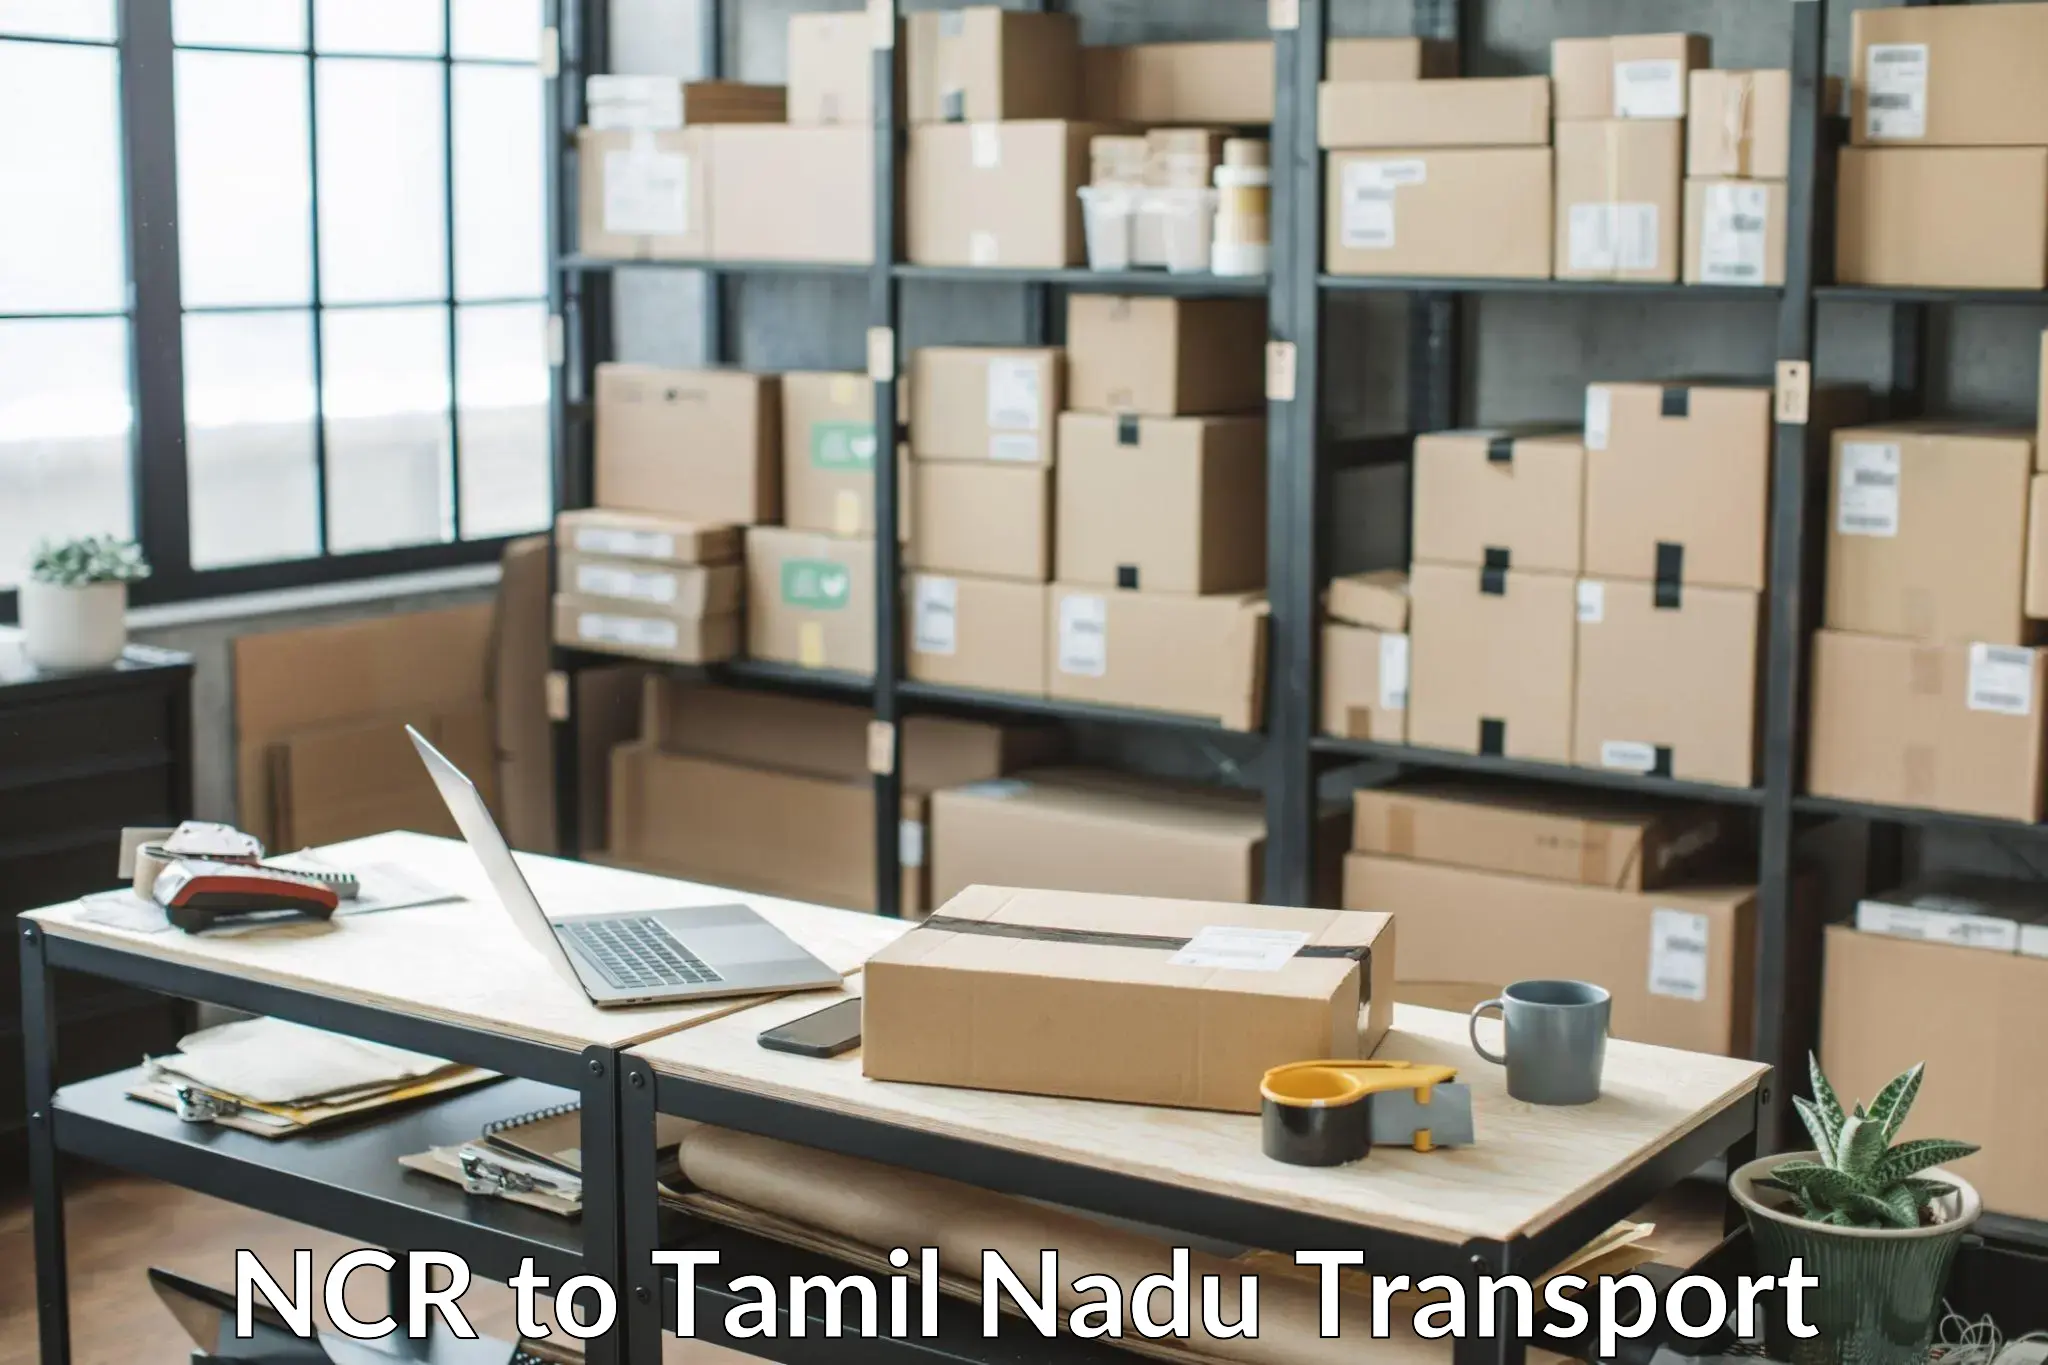 Nationwide transport services NCR to Ennore Port Chennai